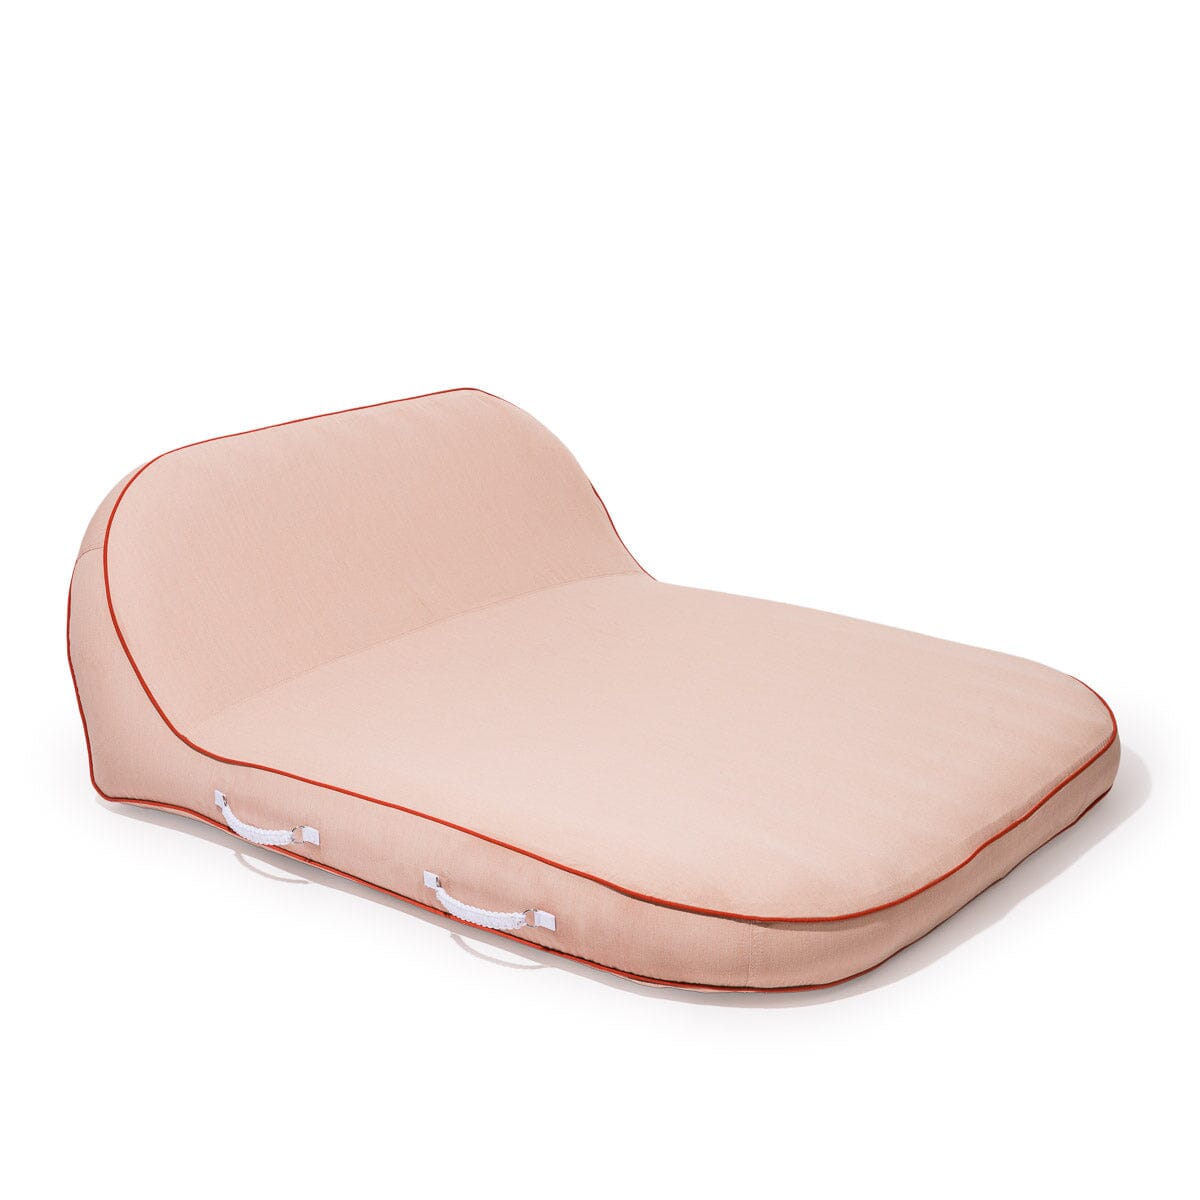 The Xl Pool Lounger - Rivie Pink Pool Lounger Business & Pleasure Co 